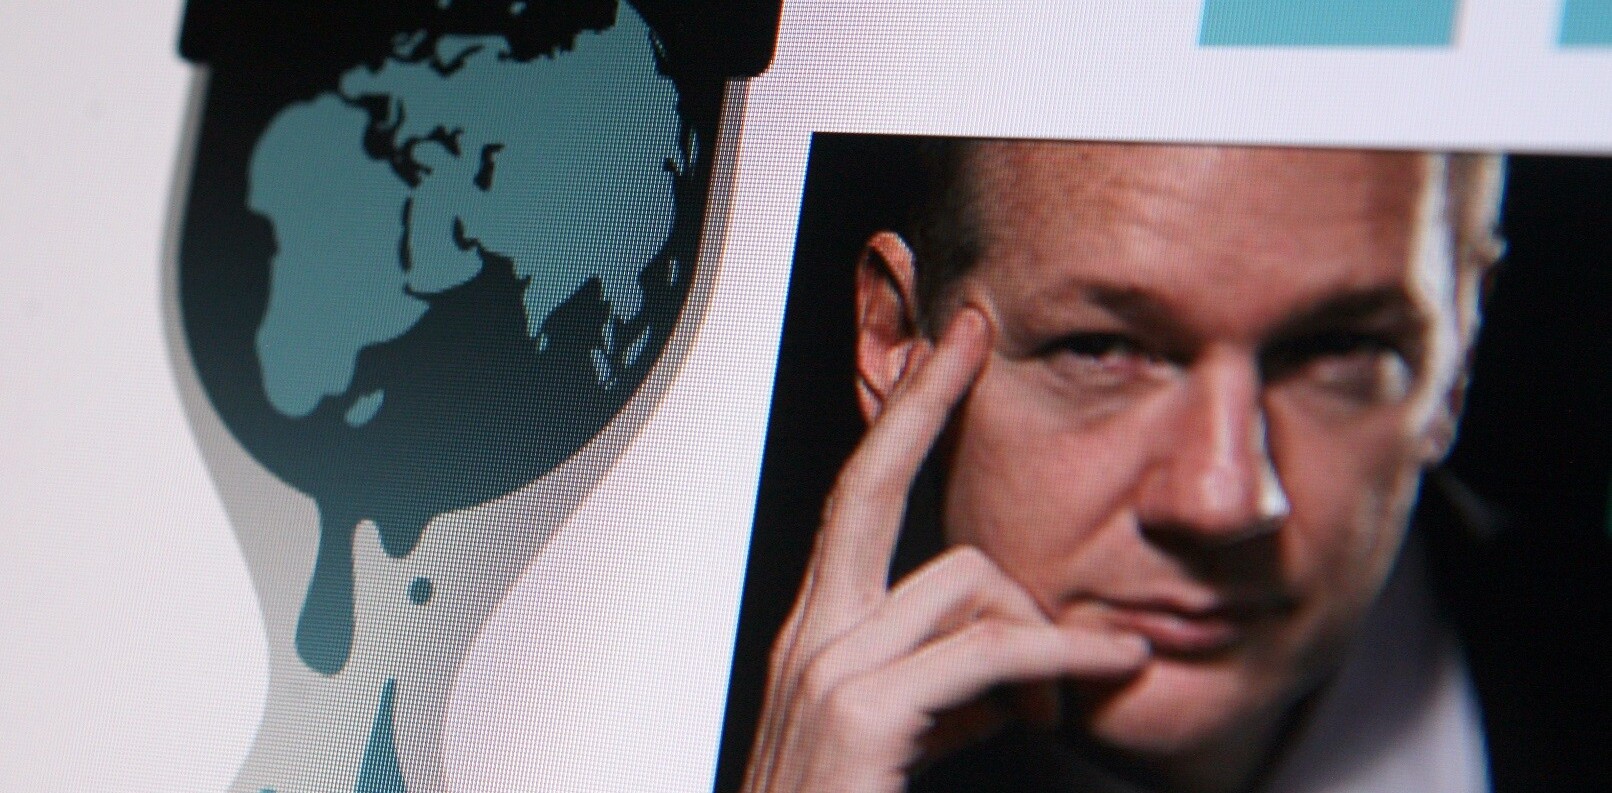 Julian Assange’s ‘sex crime’ legal issues are expiring but he’s staying in the embassy